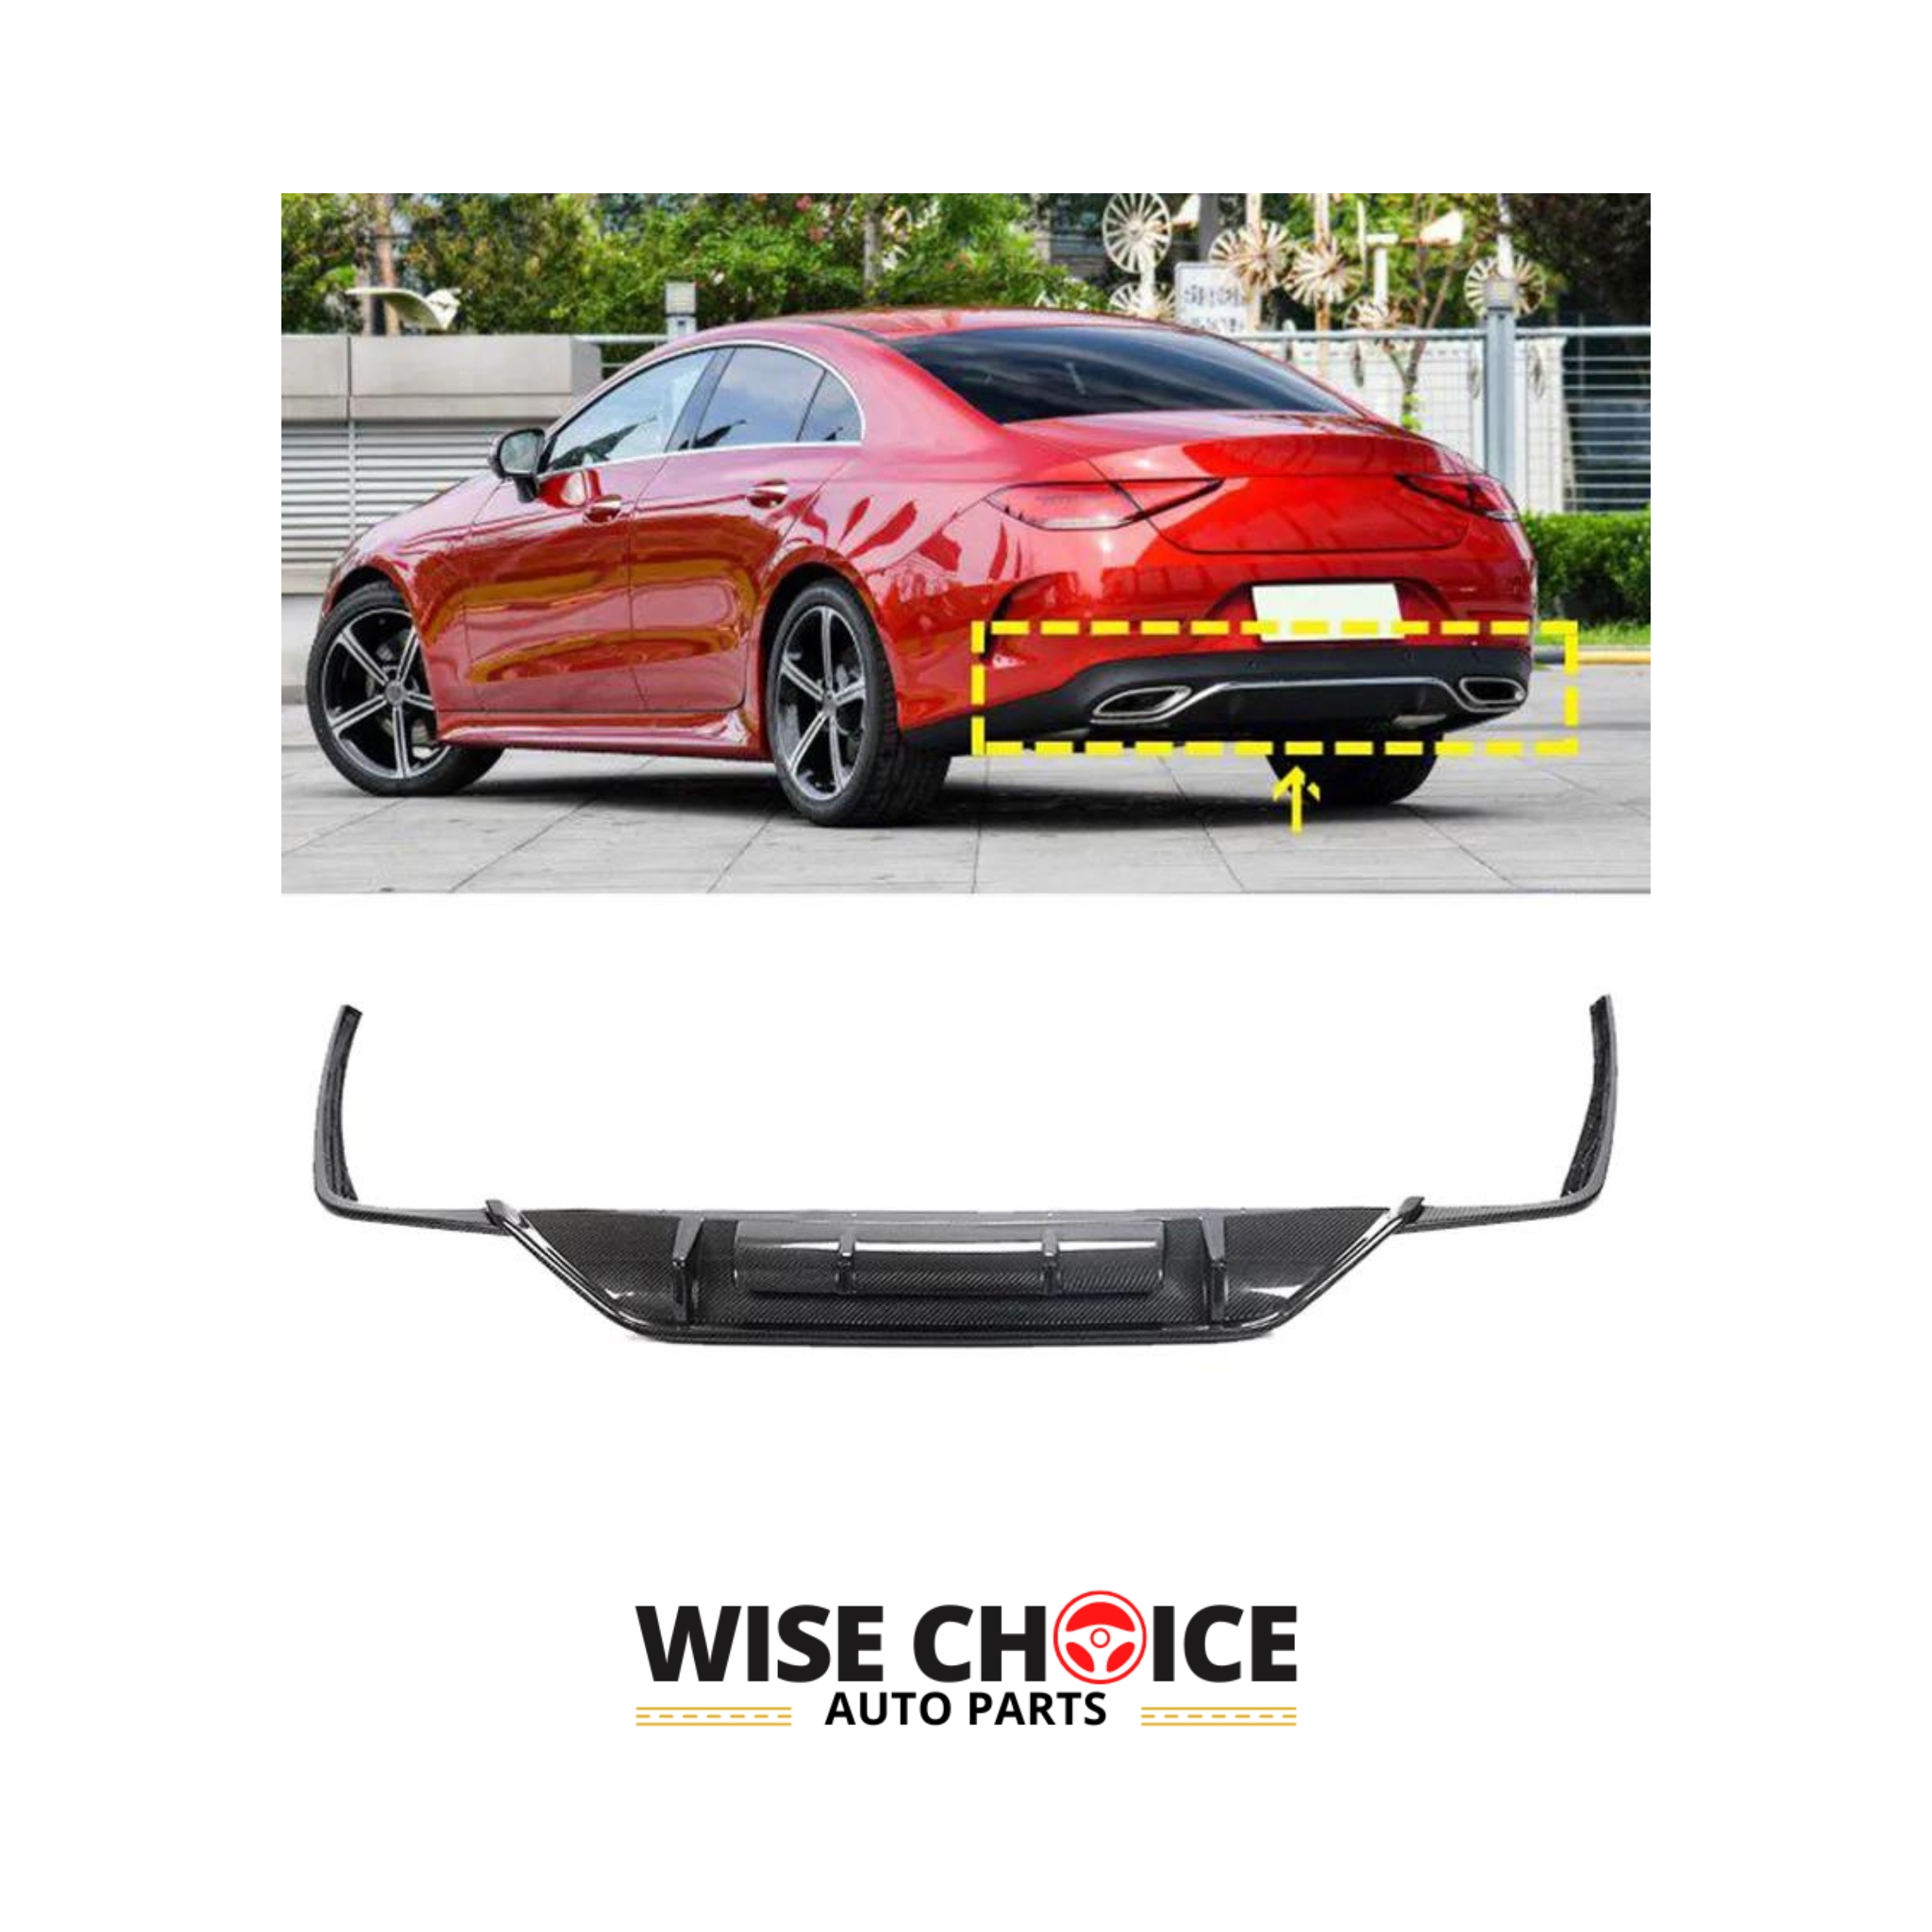 Upgrade Style and Performance with 2019-2022 C257 M-Benz CLS Class Carbon Fiber Rear Diffuser